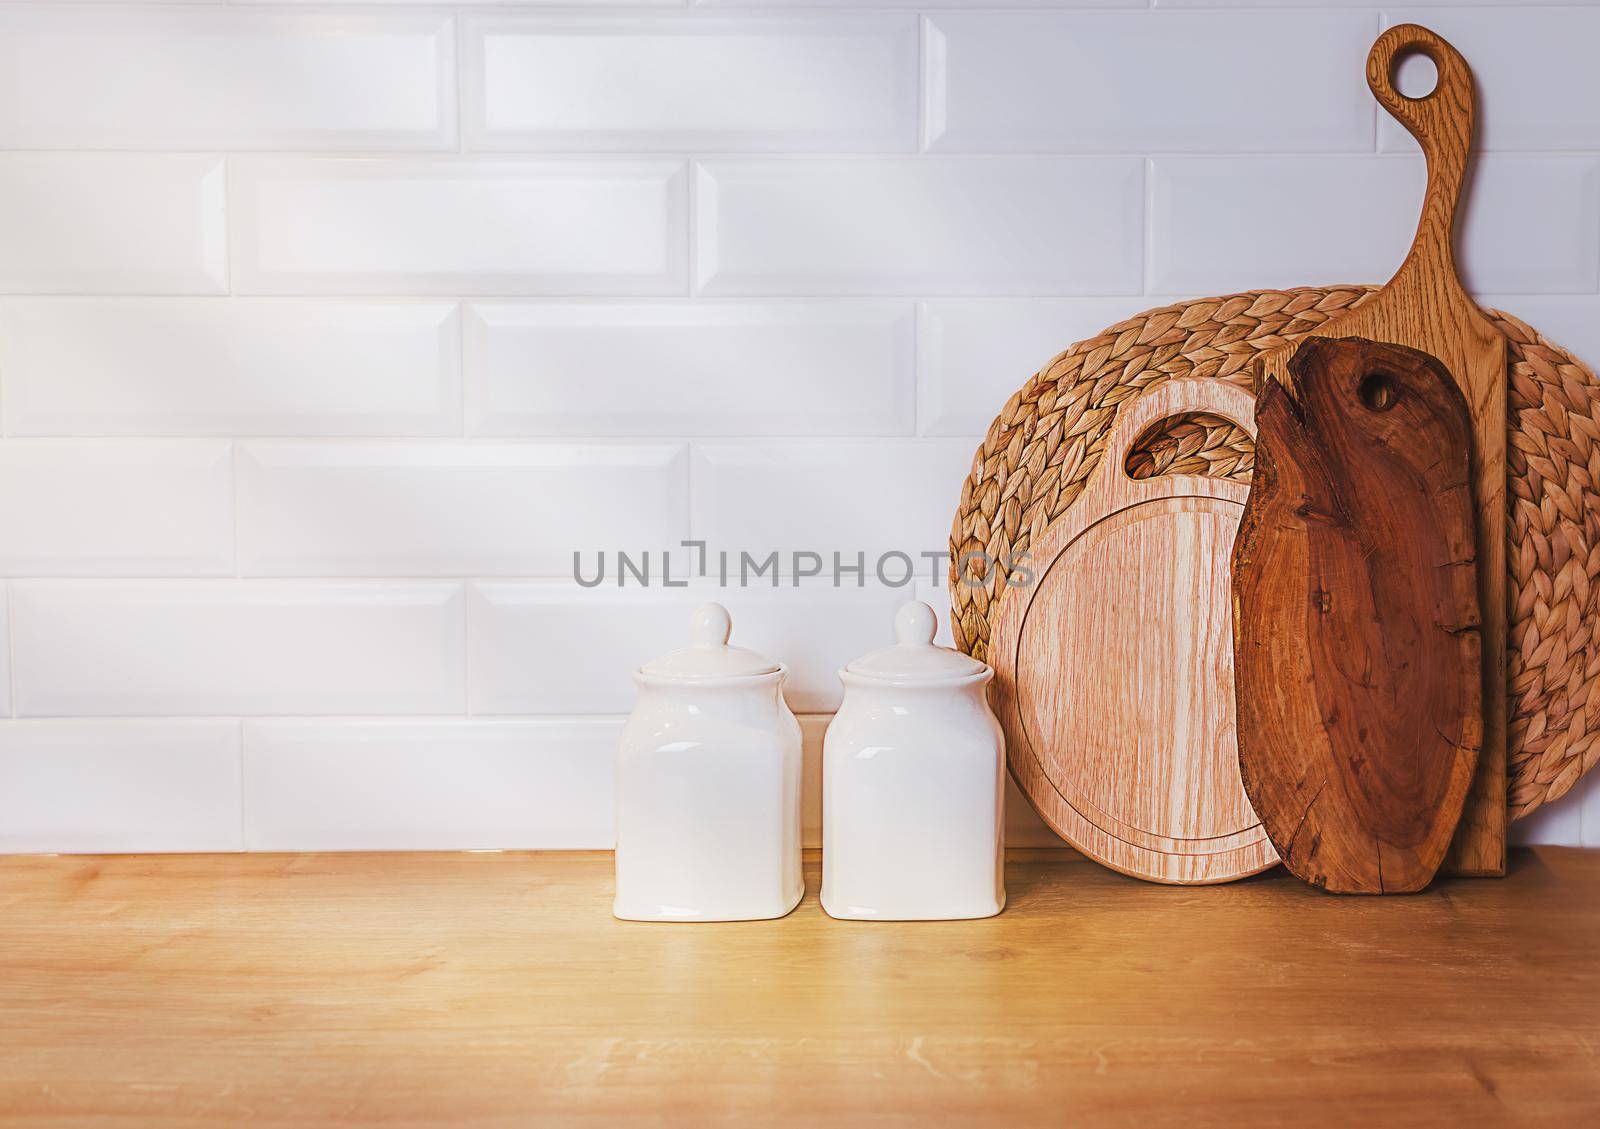 kitchen template, mockup. Vintage image of kitchen with white wall and wooden boards by Ramanouskaya